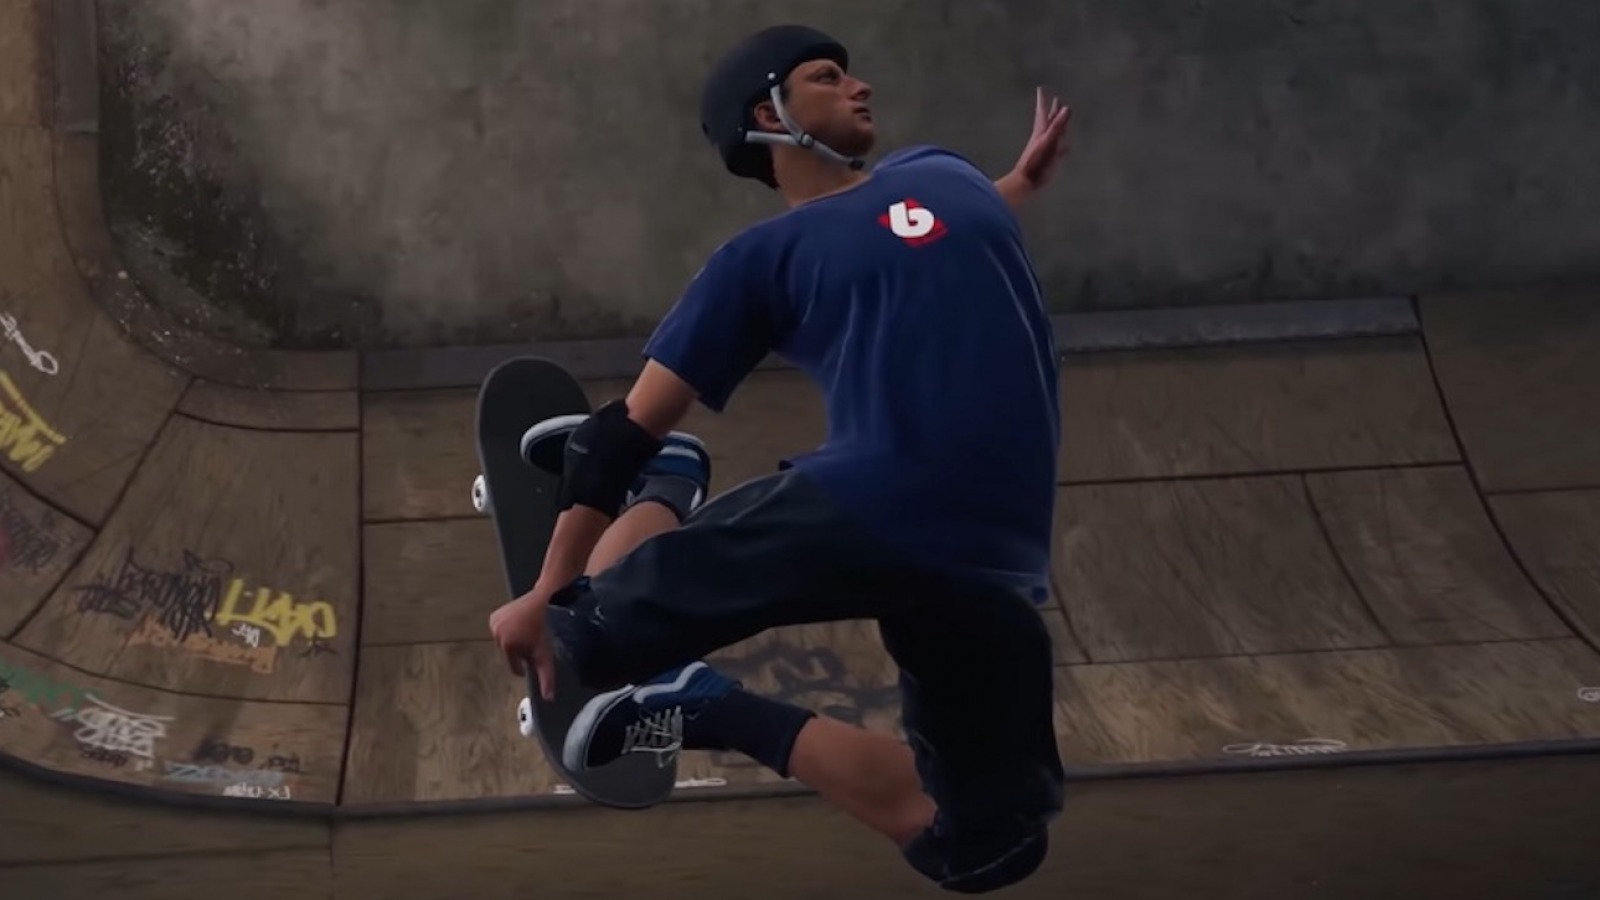 Skate 3 Review - The Next Best Thing To Real Skateboarding - Game Informer